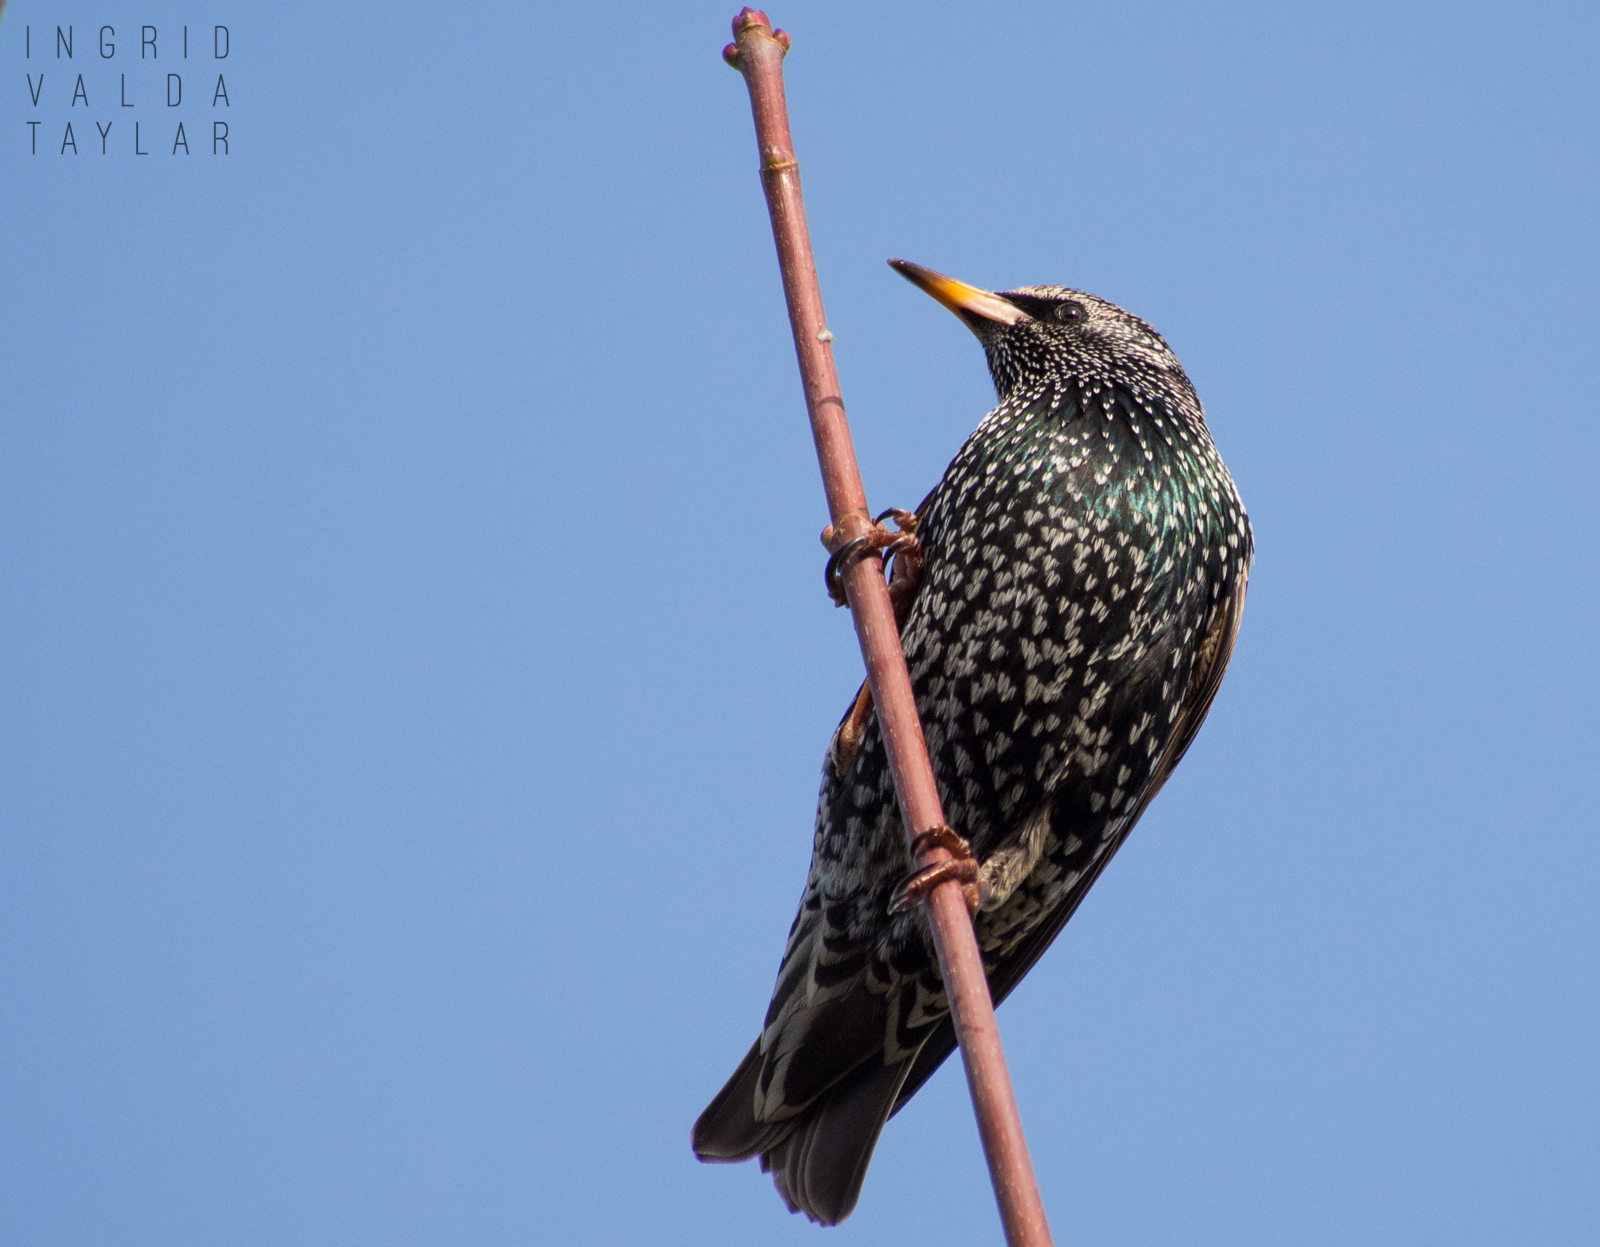 European Starling Perched on Branch